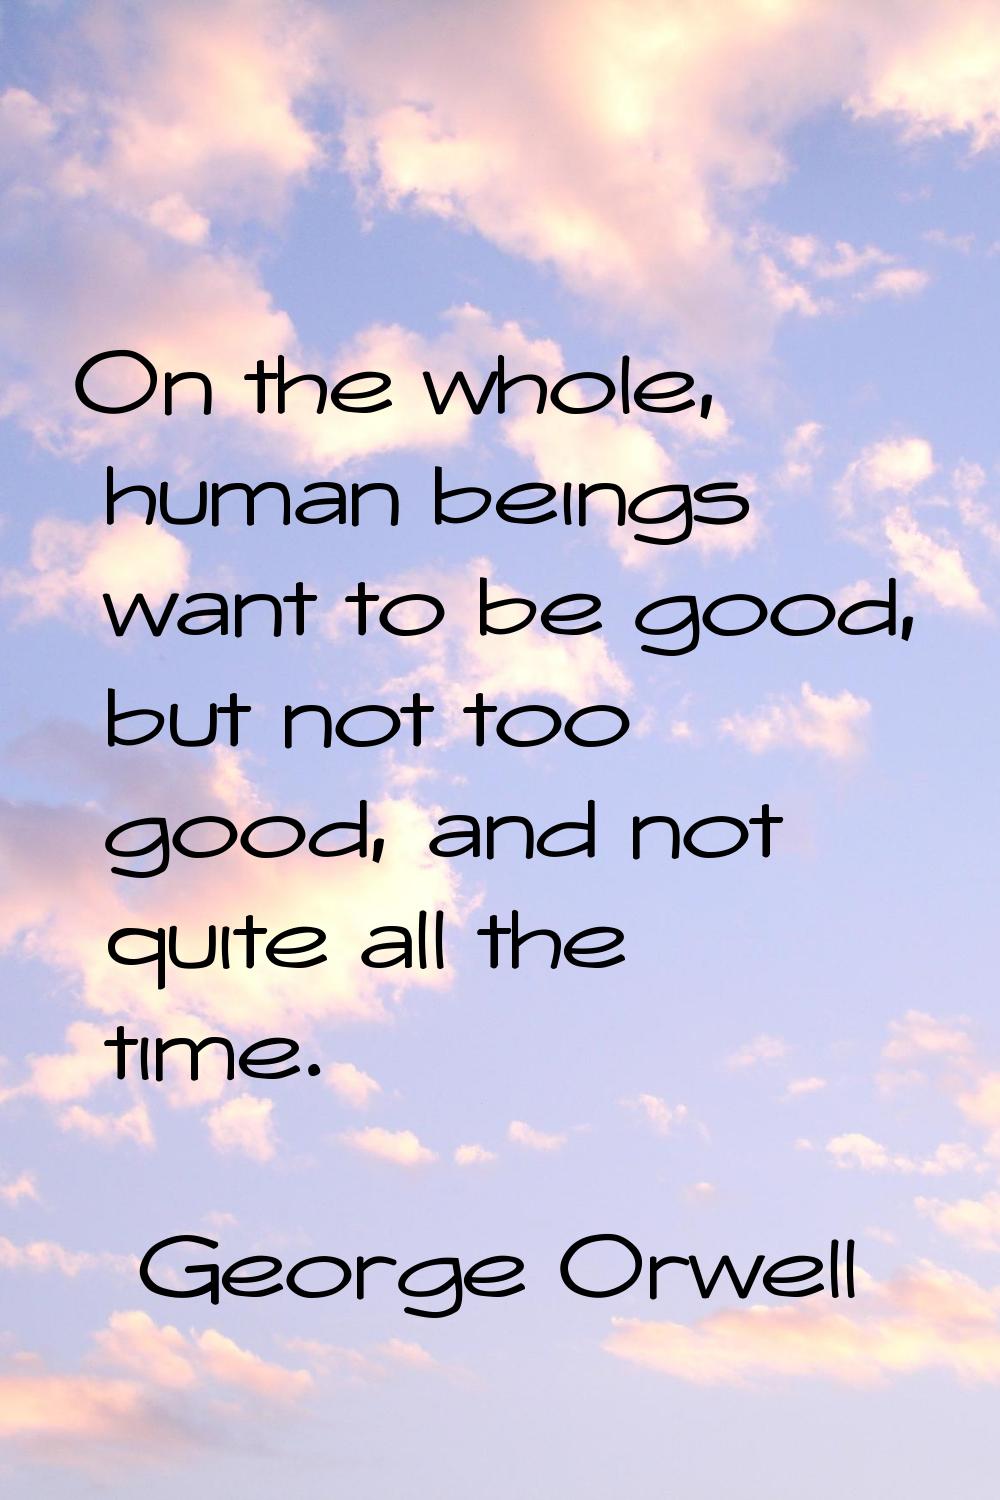 On the whole, human beings want to be good, but not too good, and not quite all the time.